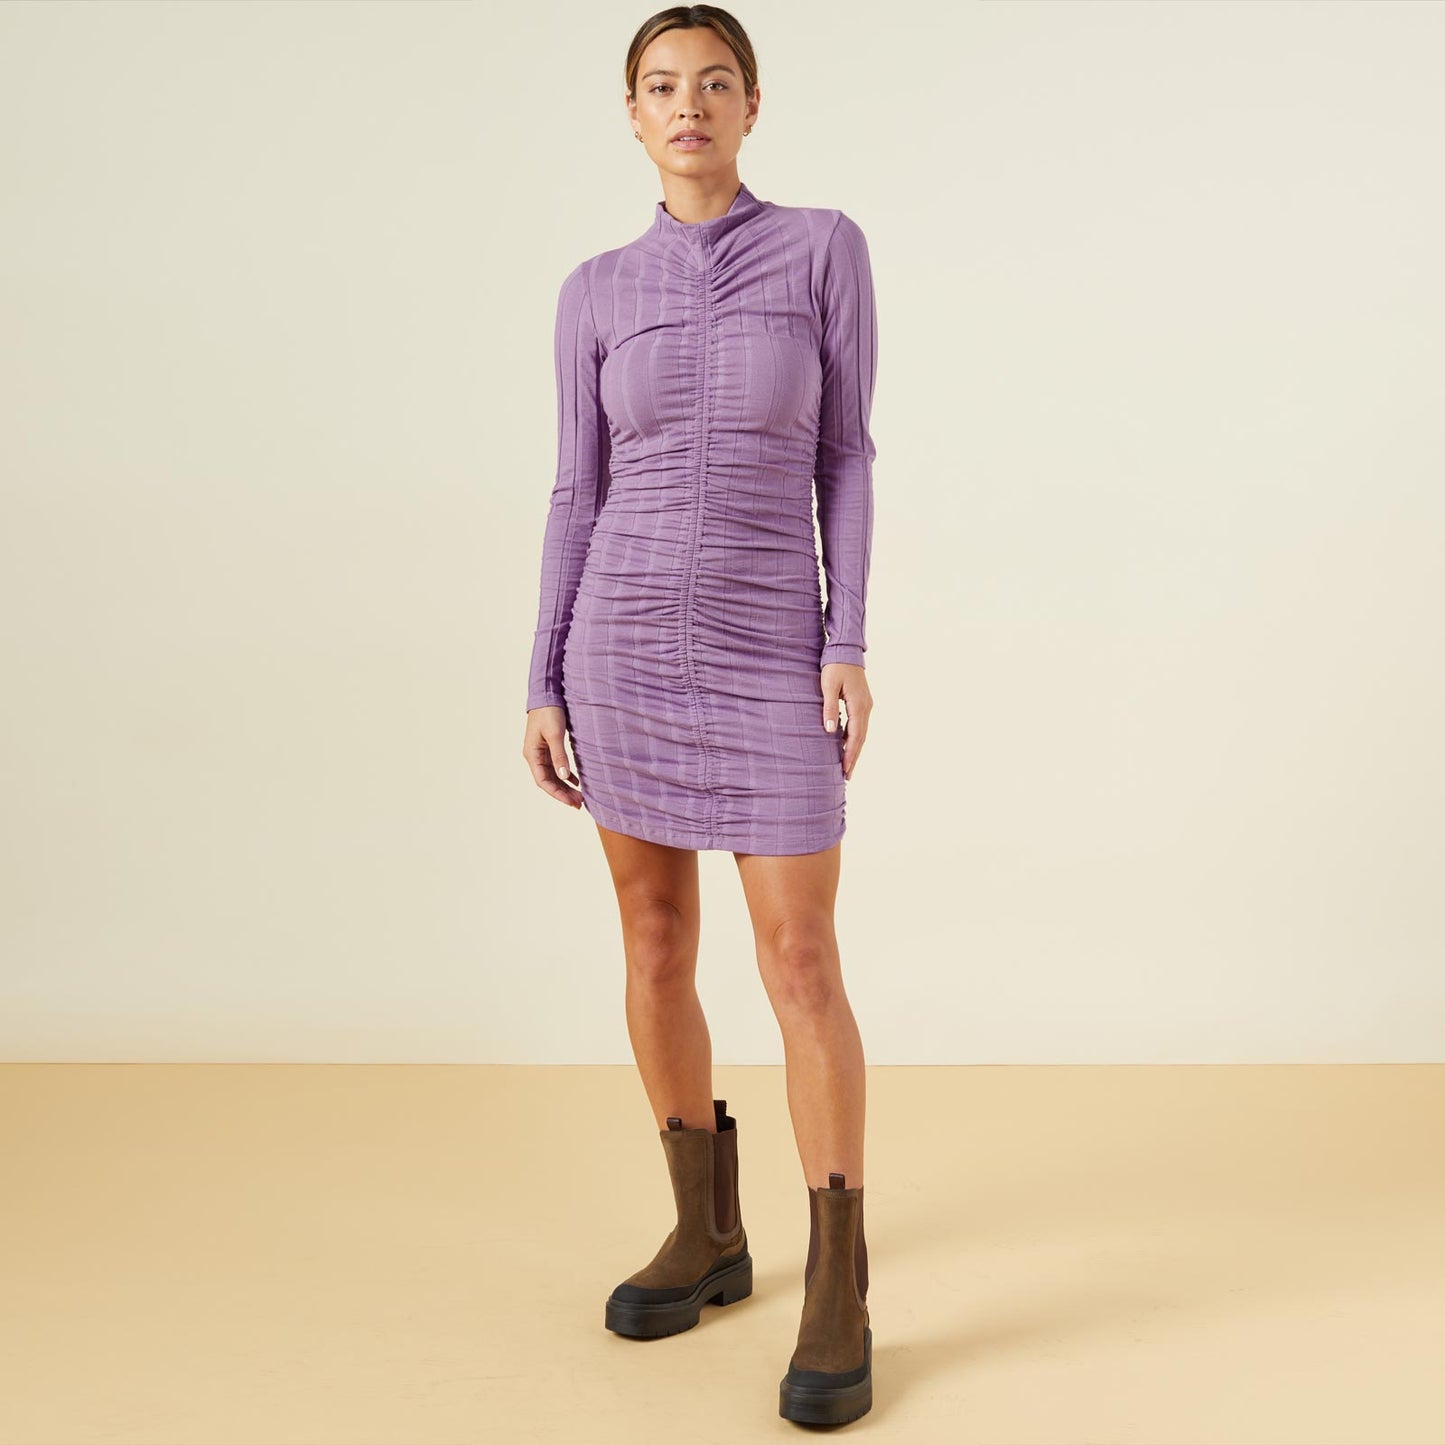 Front view of model wearing the flat rib mock shirred dress in aster purple.